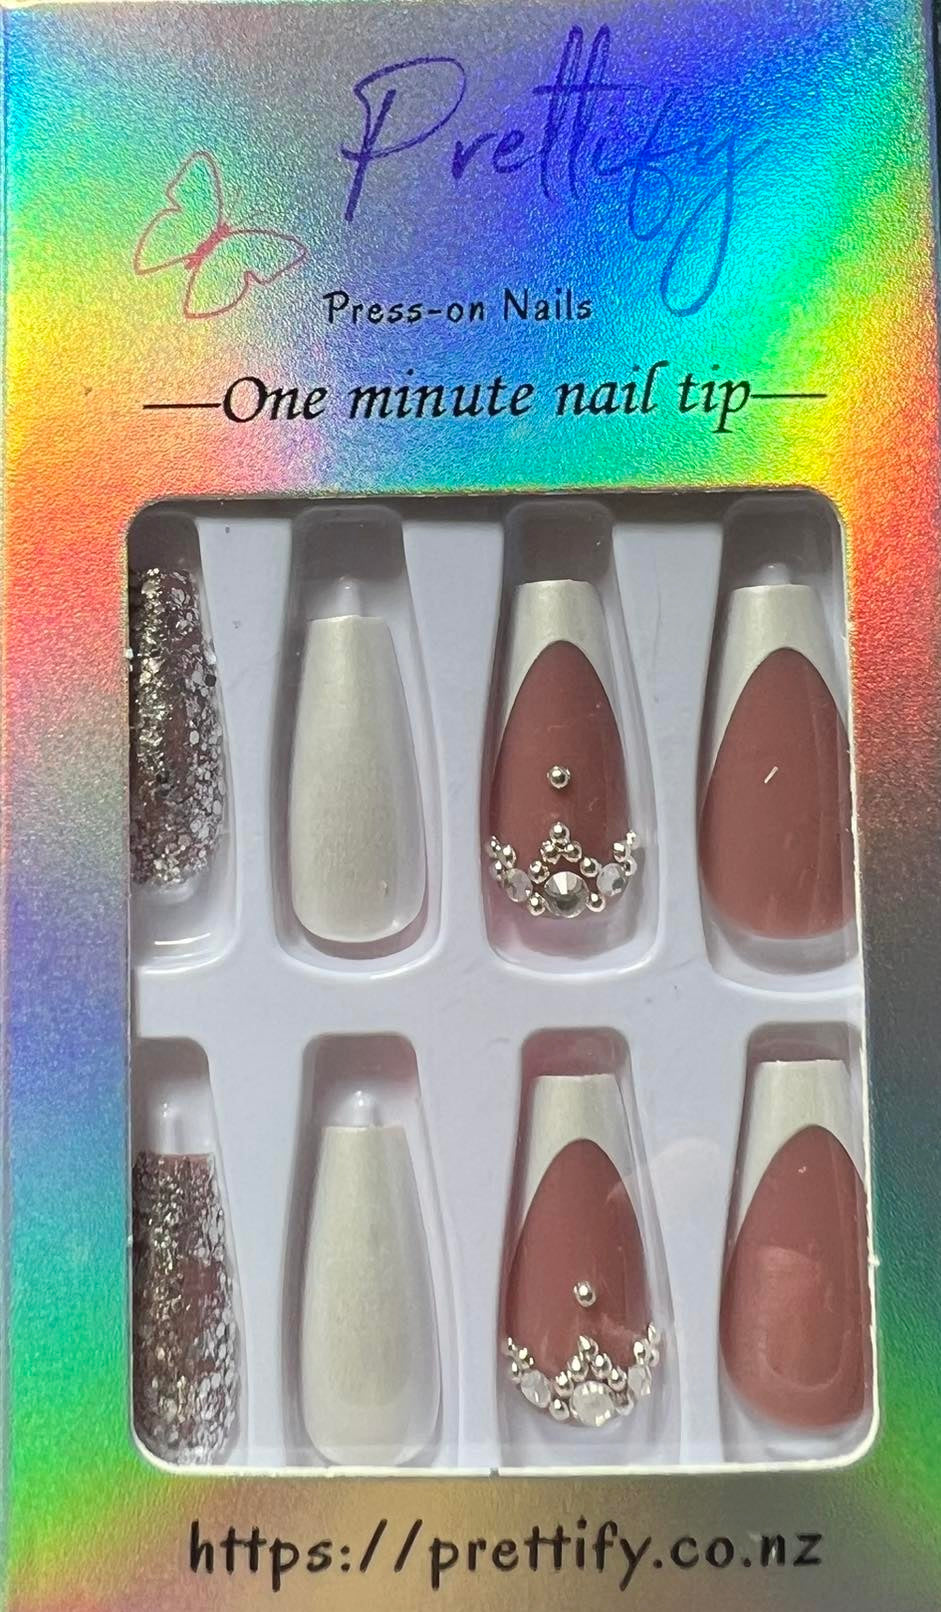 Medium Length Coffin Press on Nails. Pearl White, White Tips, Silver Glitter & Jewels. Durable Acrylic Press on Nails. Easy and quick to apply. Great for those special occasions, parties or add an edge to any outfit. Gorgeous, flattering and you can re-use them again and again.